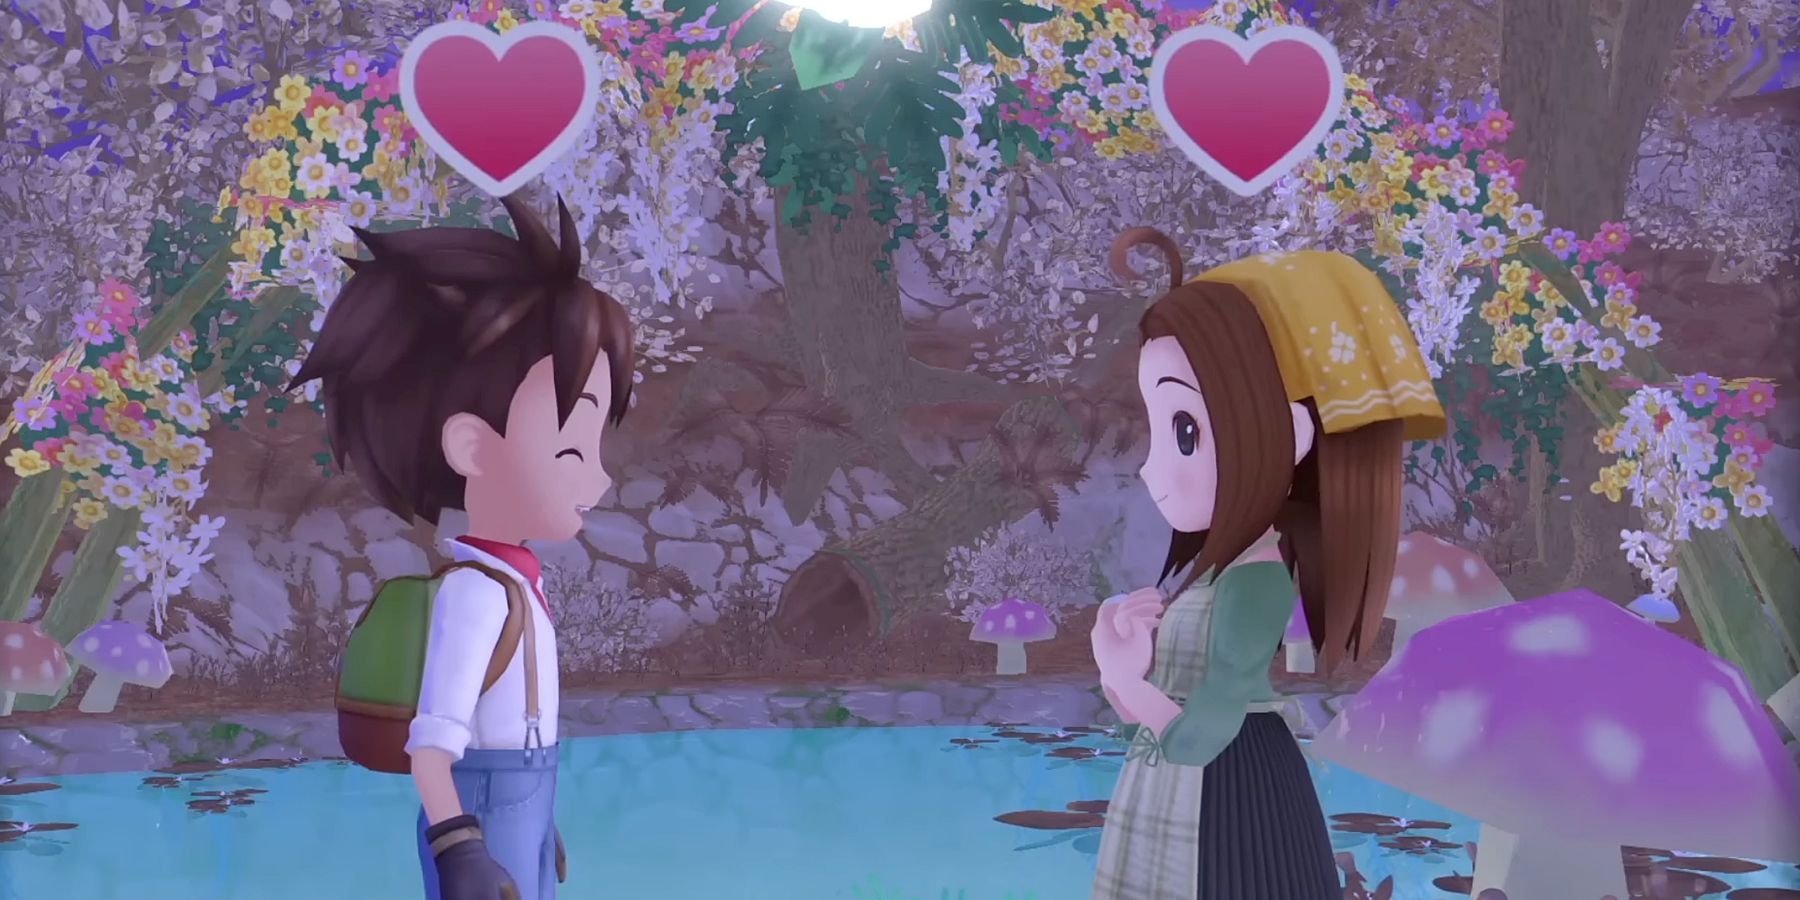 Fun Story of Seasons: A Wonderful Life TikTok Filter Picks
Out Marriage Candidate For Fans